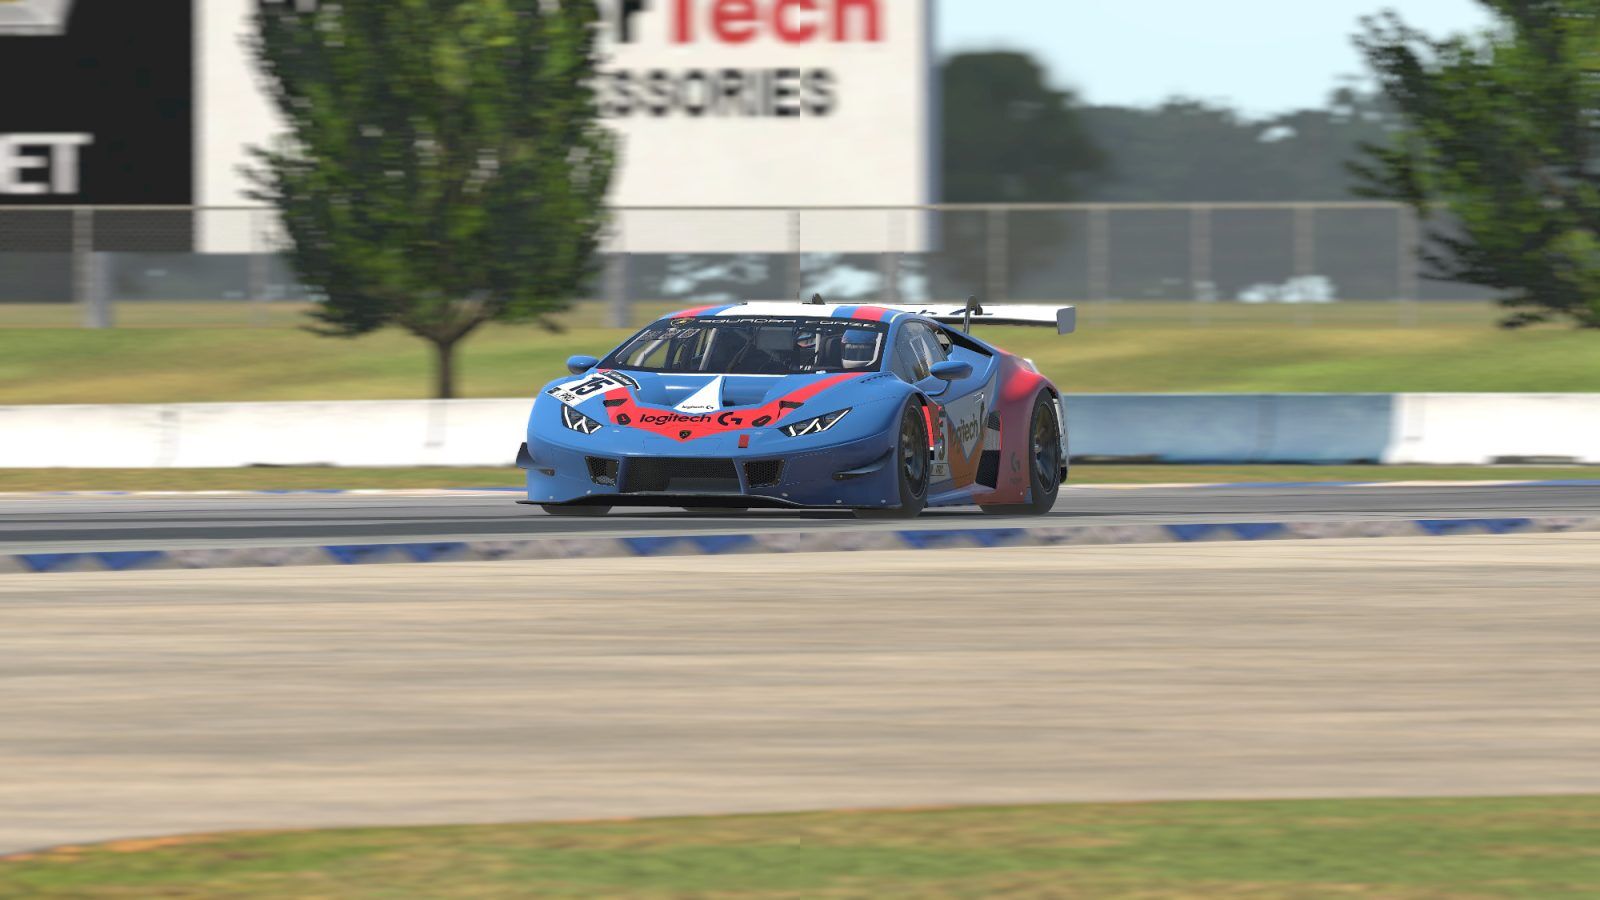 Is iRacing getting cheaper?